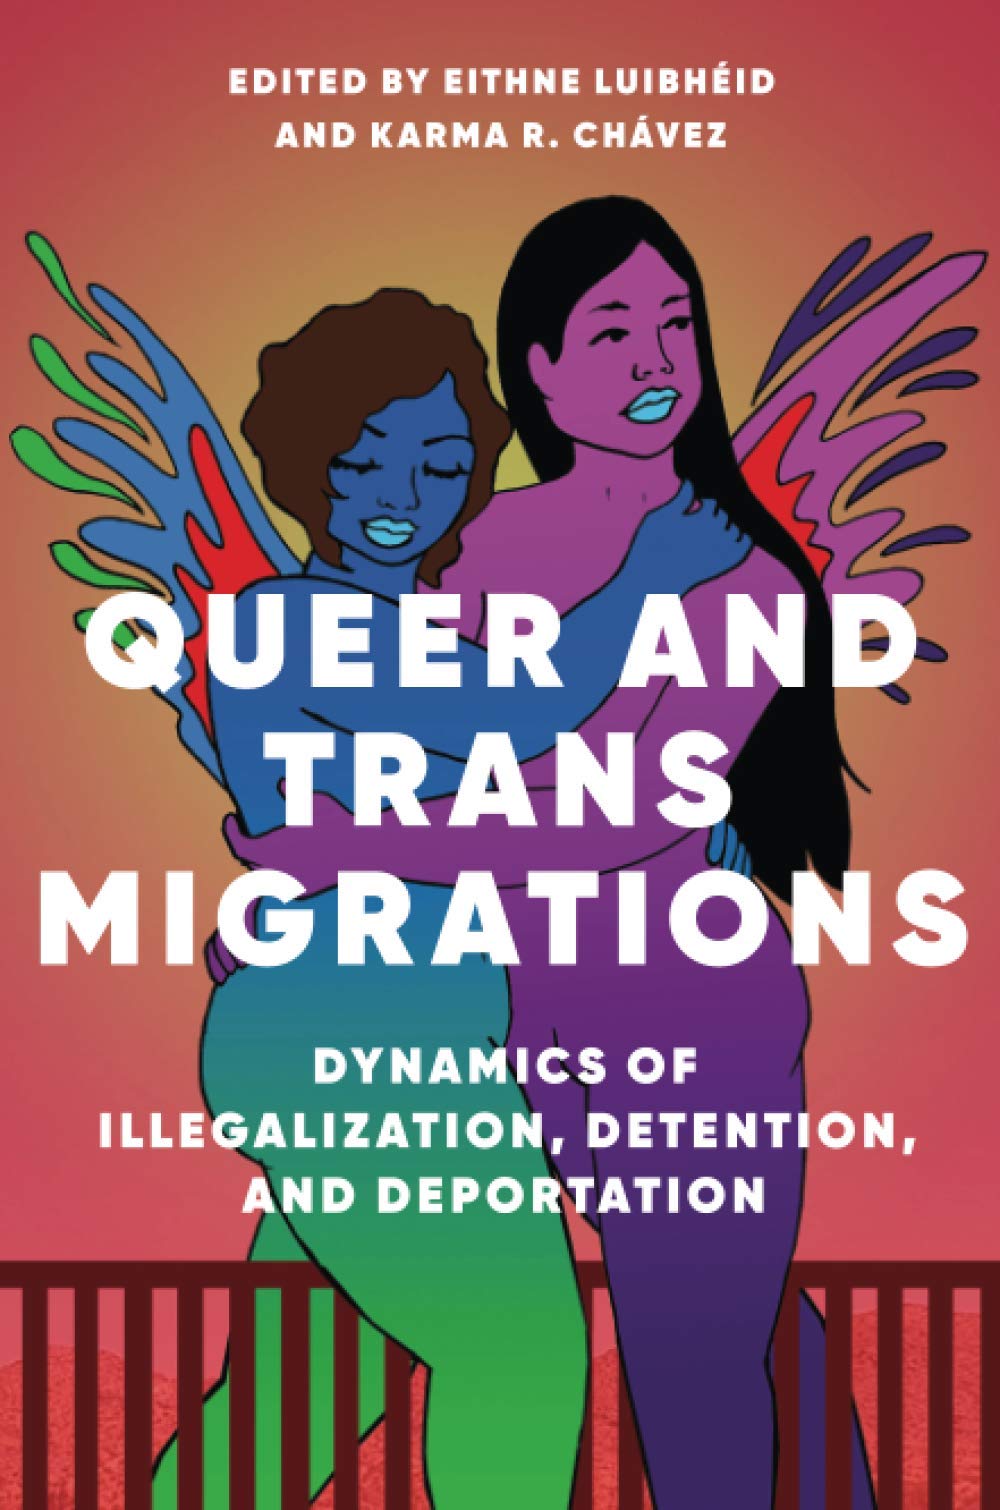 Queer and Trans Migrations: Dynamics of Illegalization, Detention, and Deportation by Eithne Luibheid, Karma R. Chavez